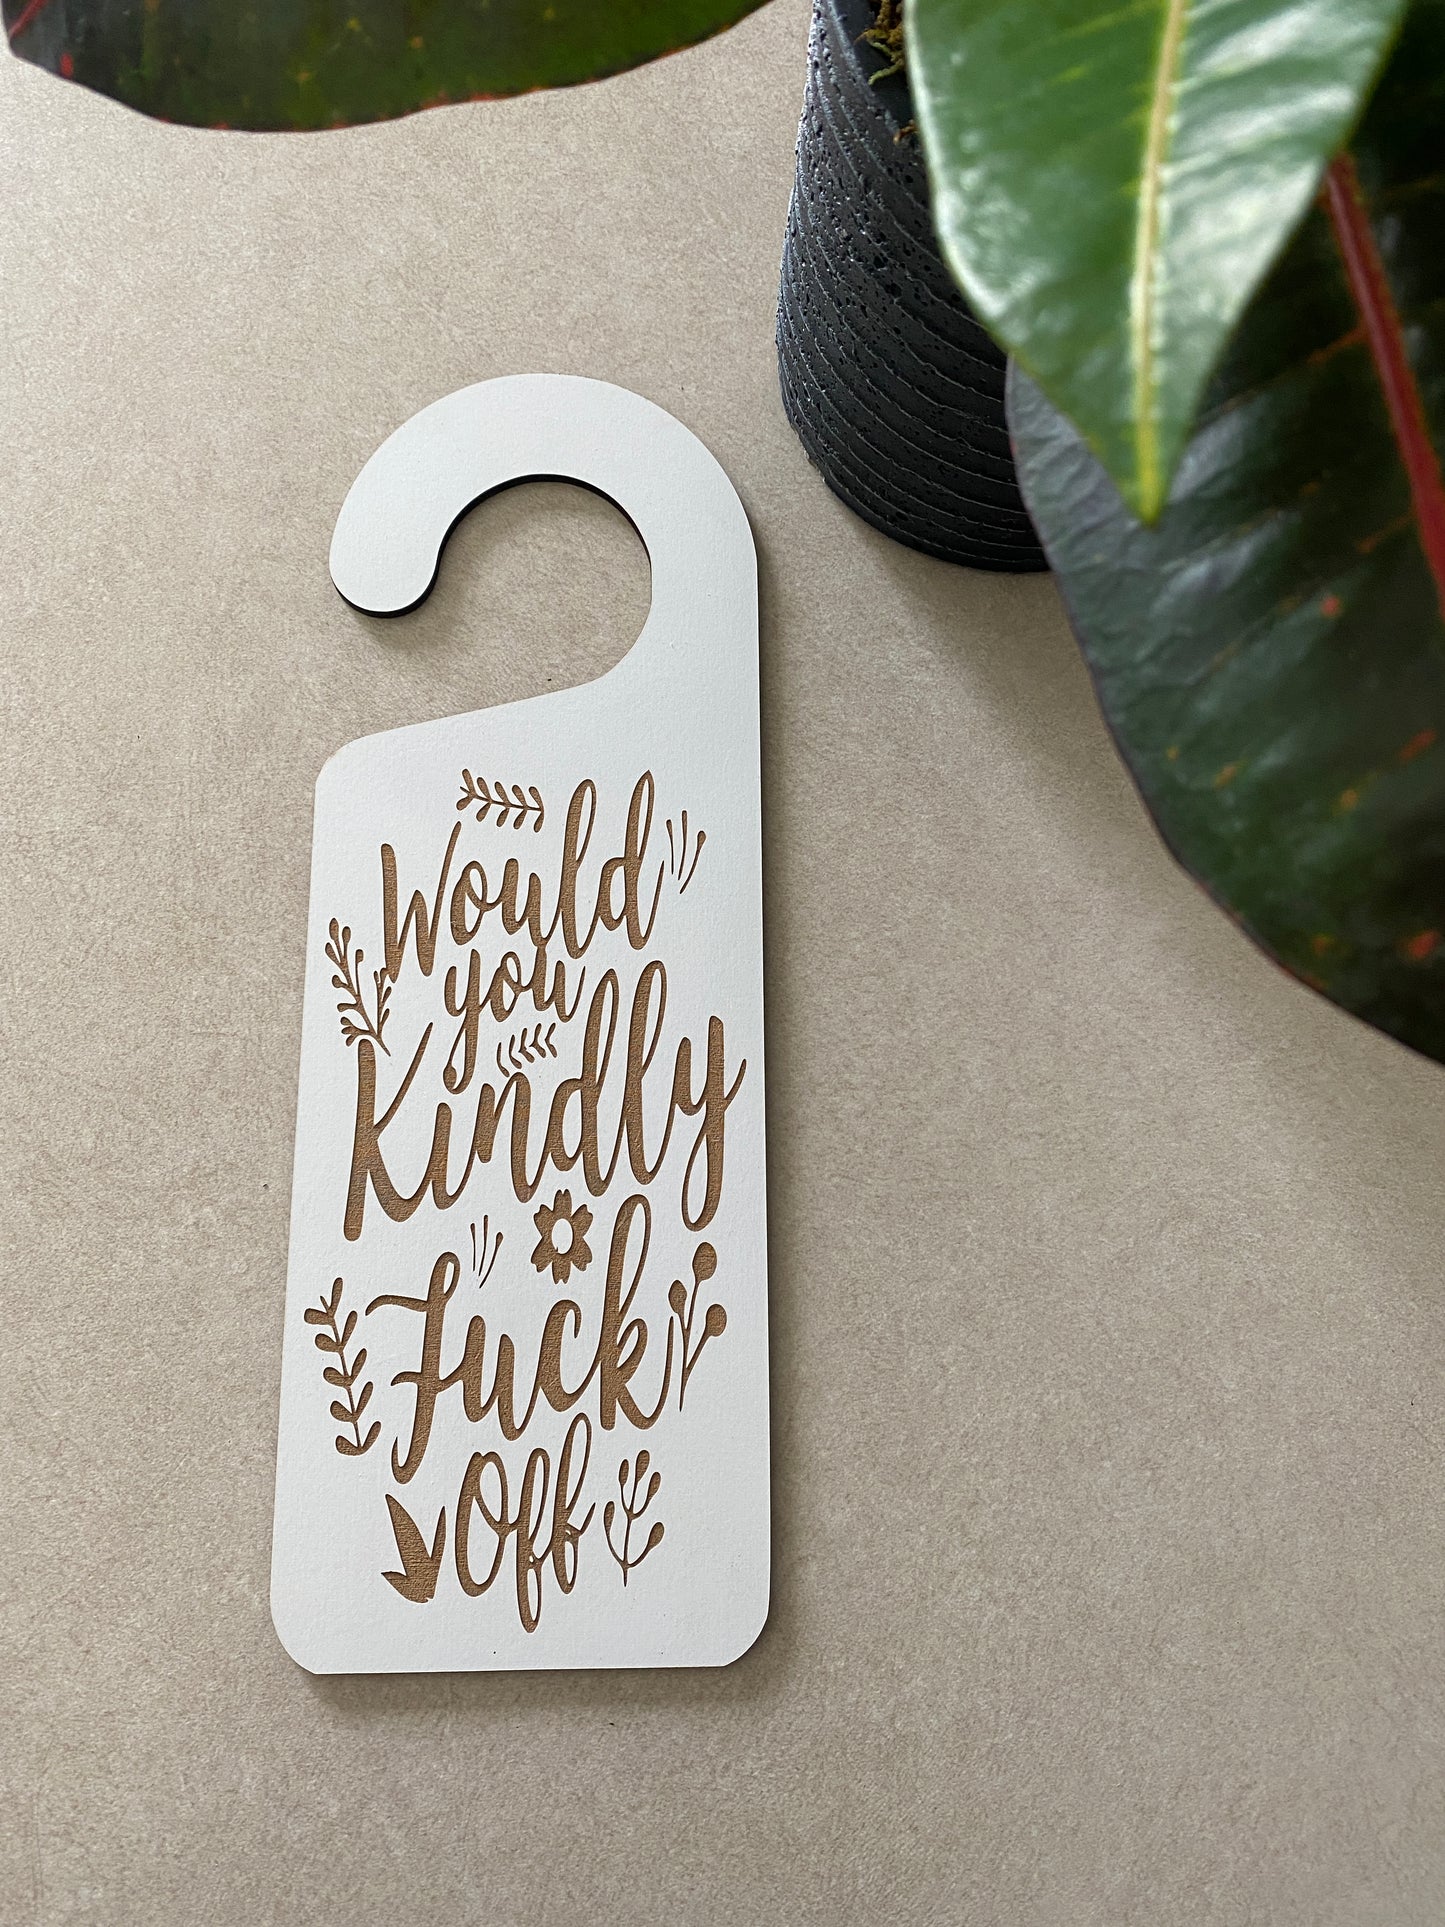 Would You Kindly Fuck Off doorknob sign